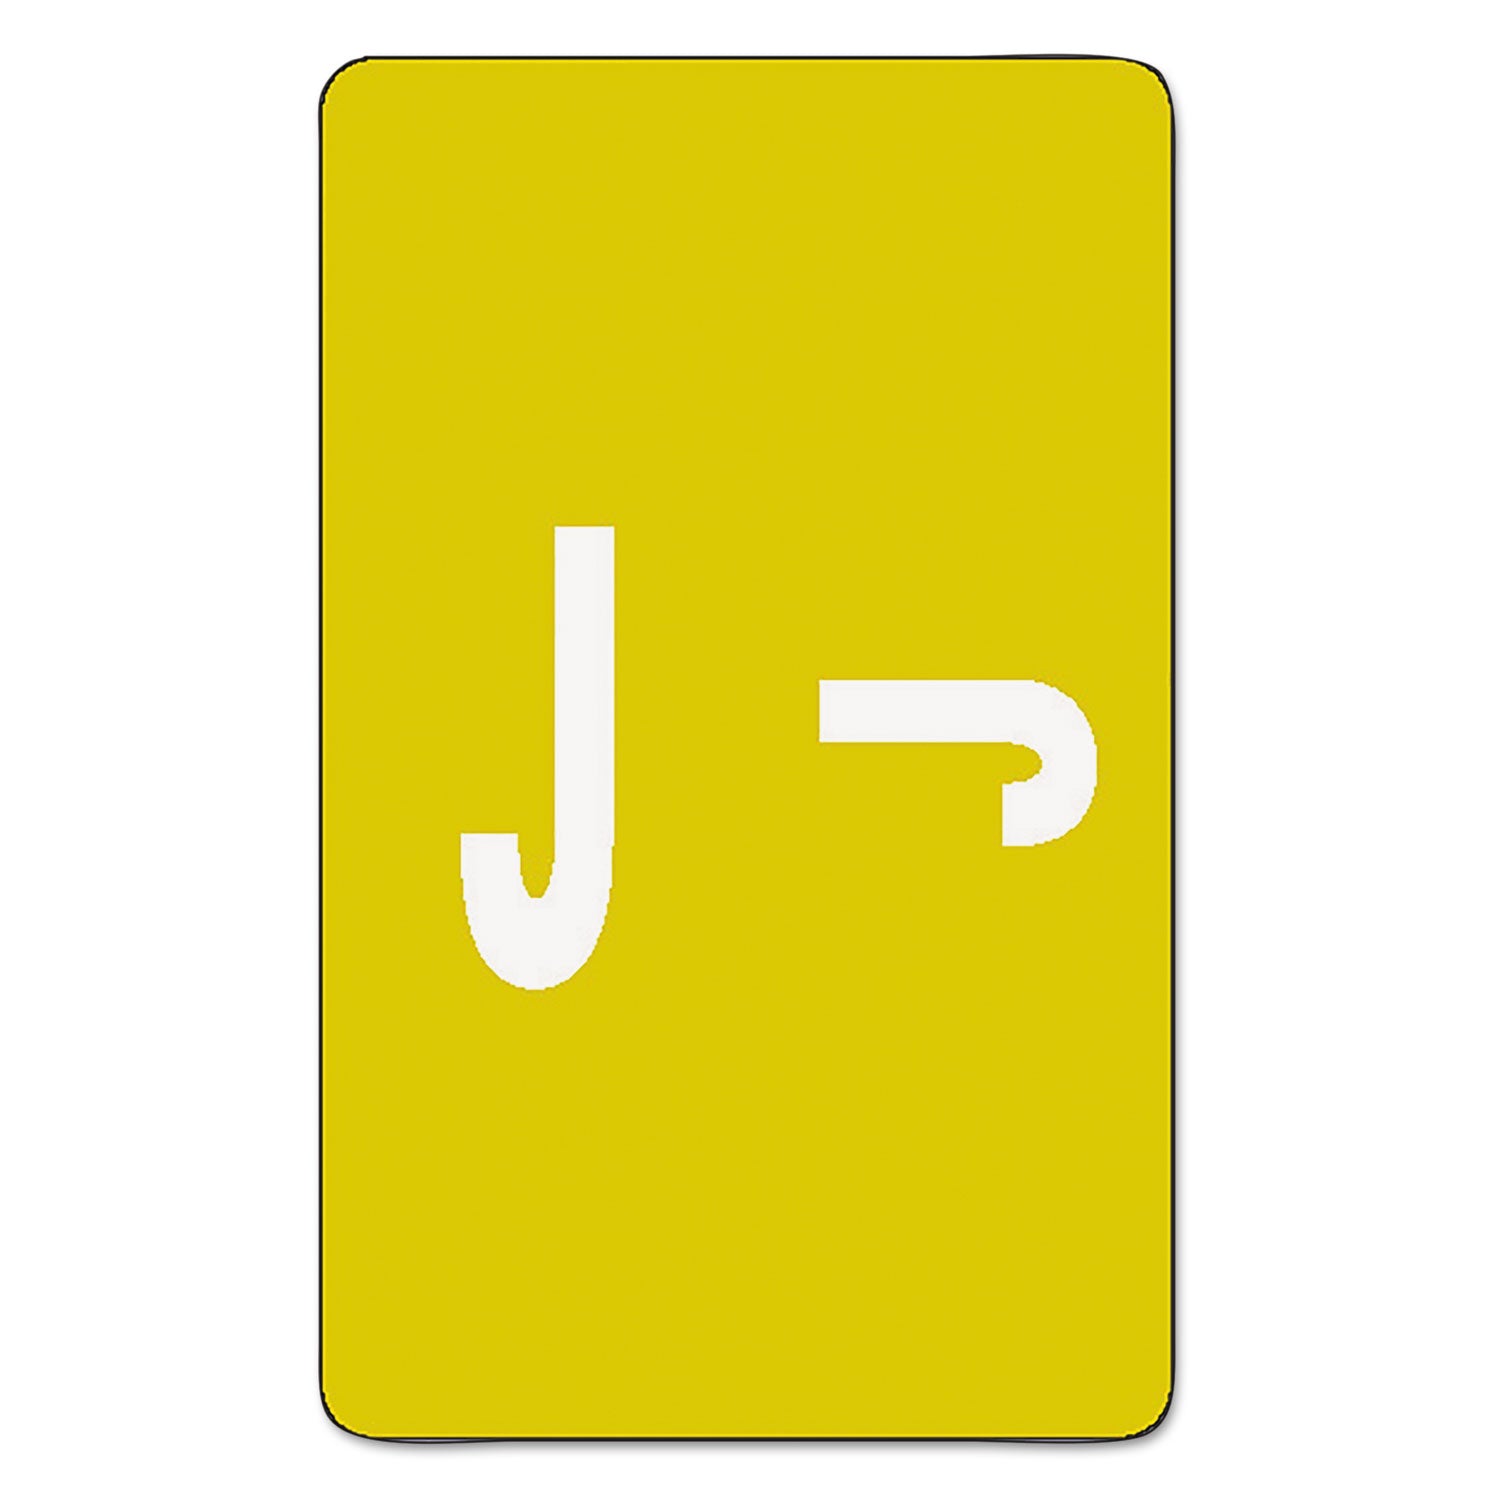 AlphaZ Color-Coded Second Letter Alphabetical Labels, J, 1 x 1.63, Yellow, 10/Sheet, 10 Sheets/Pack - 